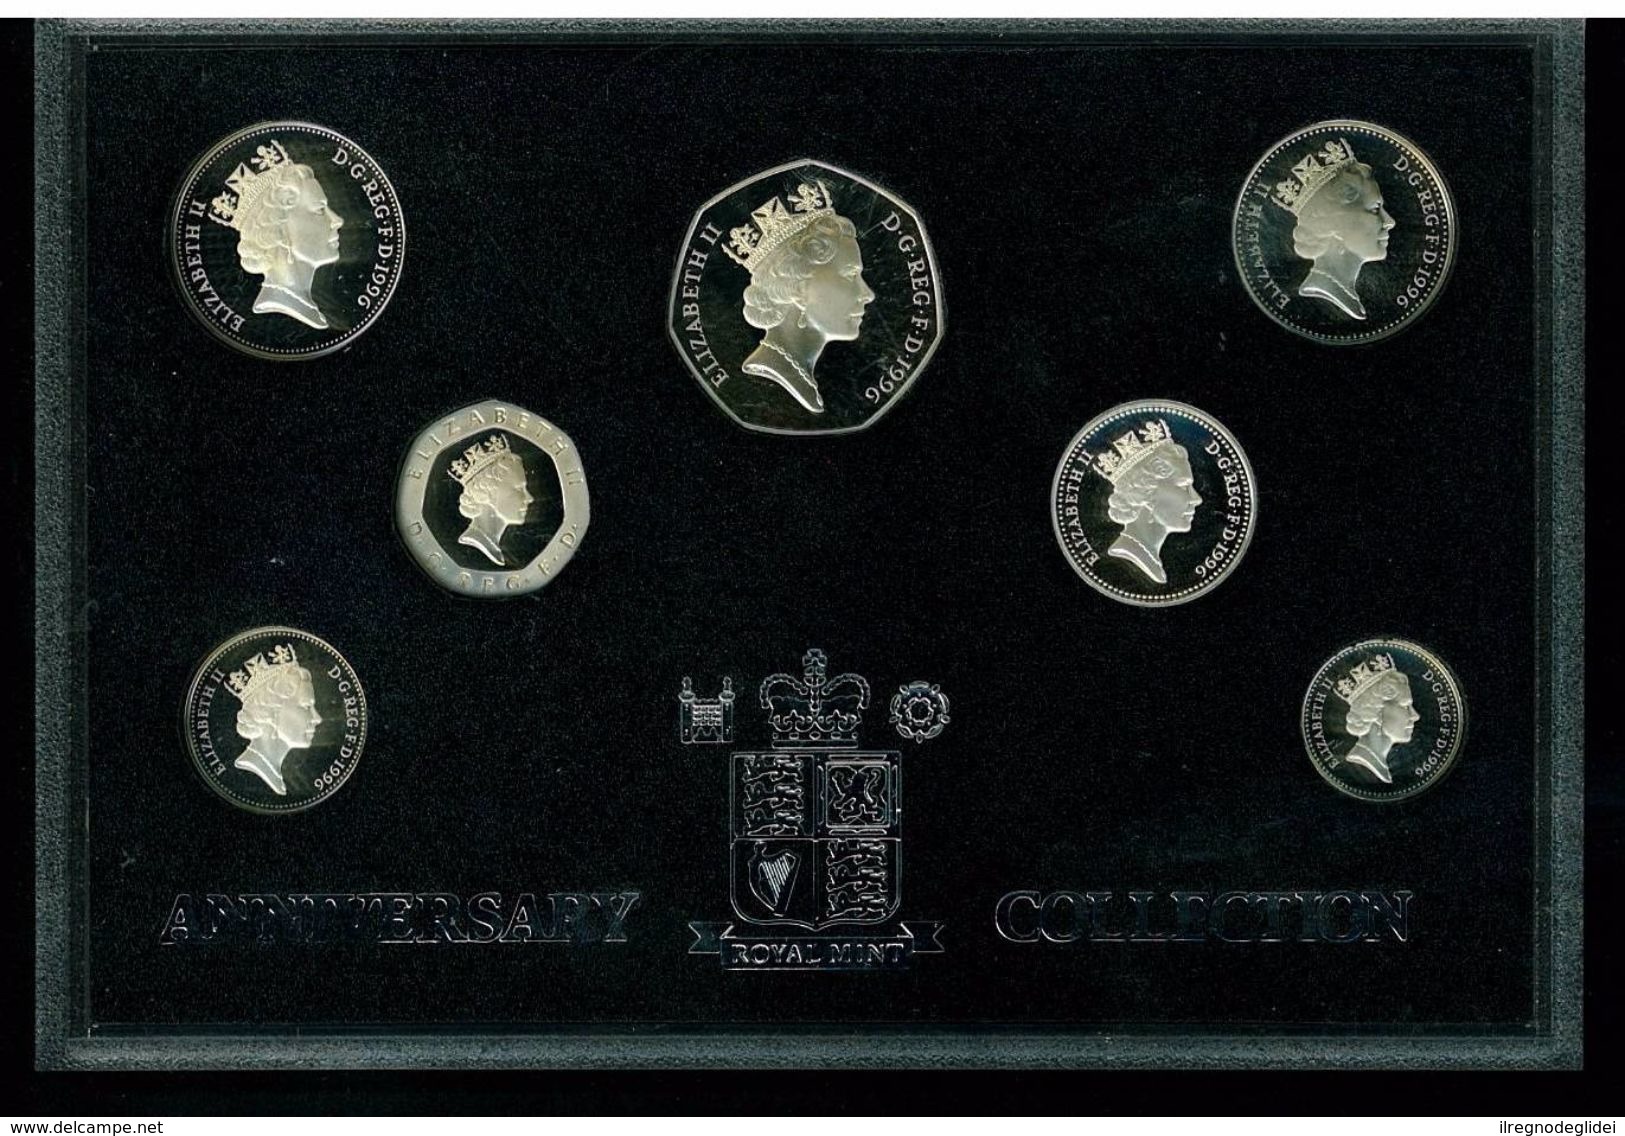 GRAN BRETAGNA - GREAT BRITAIN - YEAR 1996 MINT SET CELEBRATING THE ANNIVERSAY COLLECTION - SILVER PROOF - Mint Sets & Proof Sets